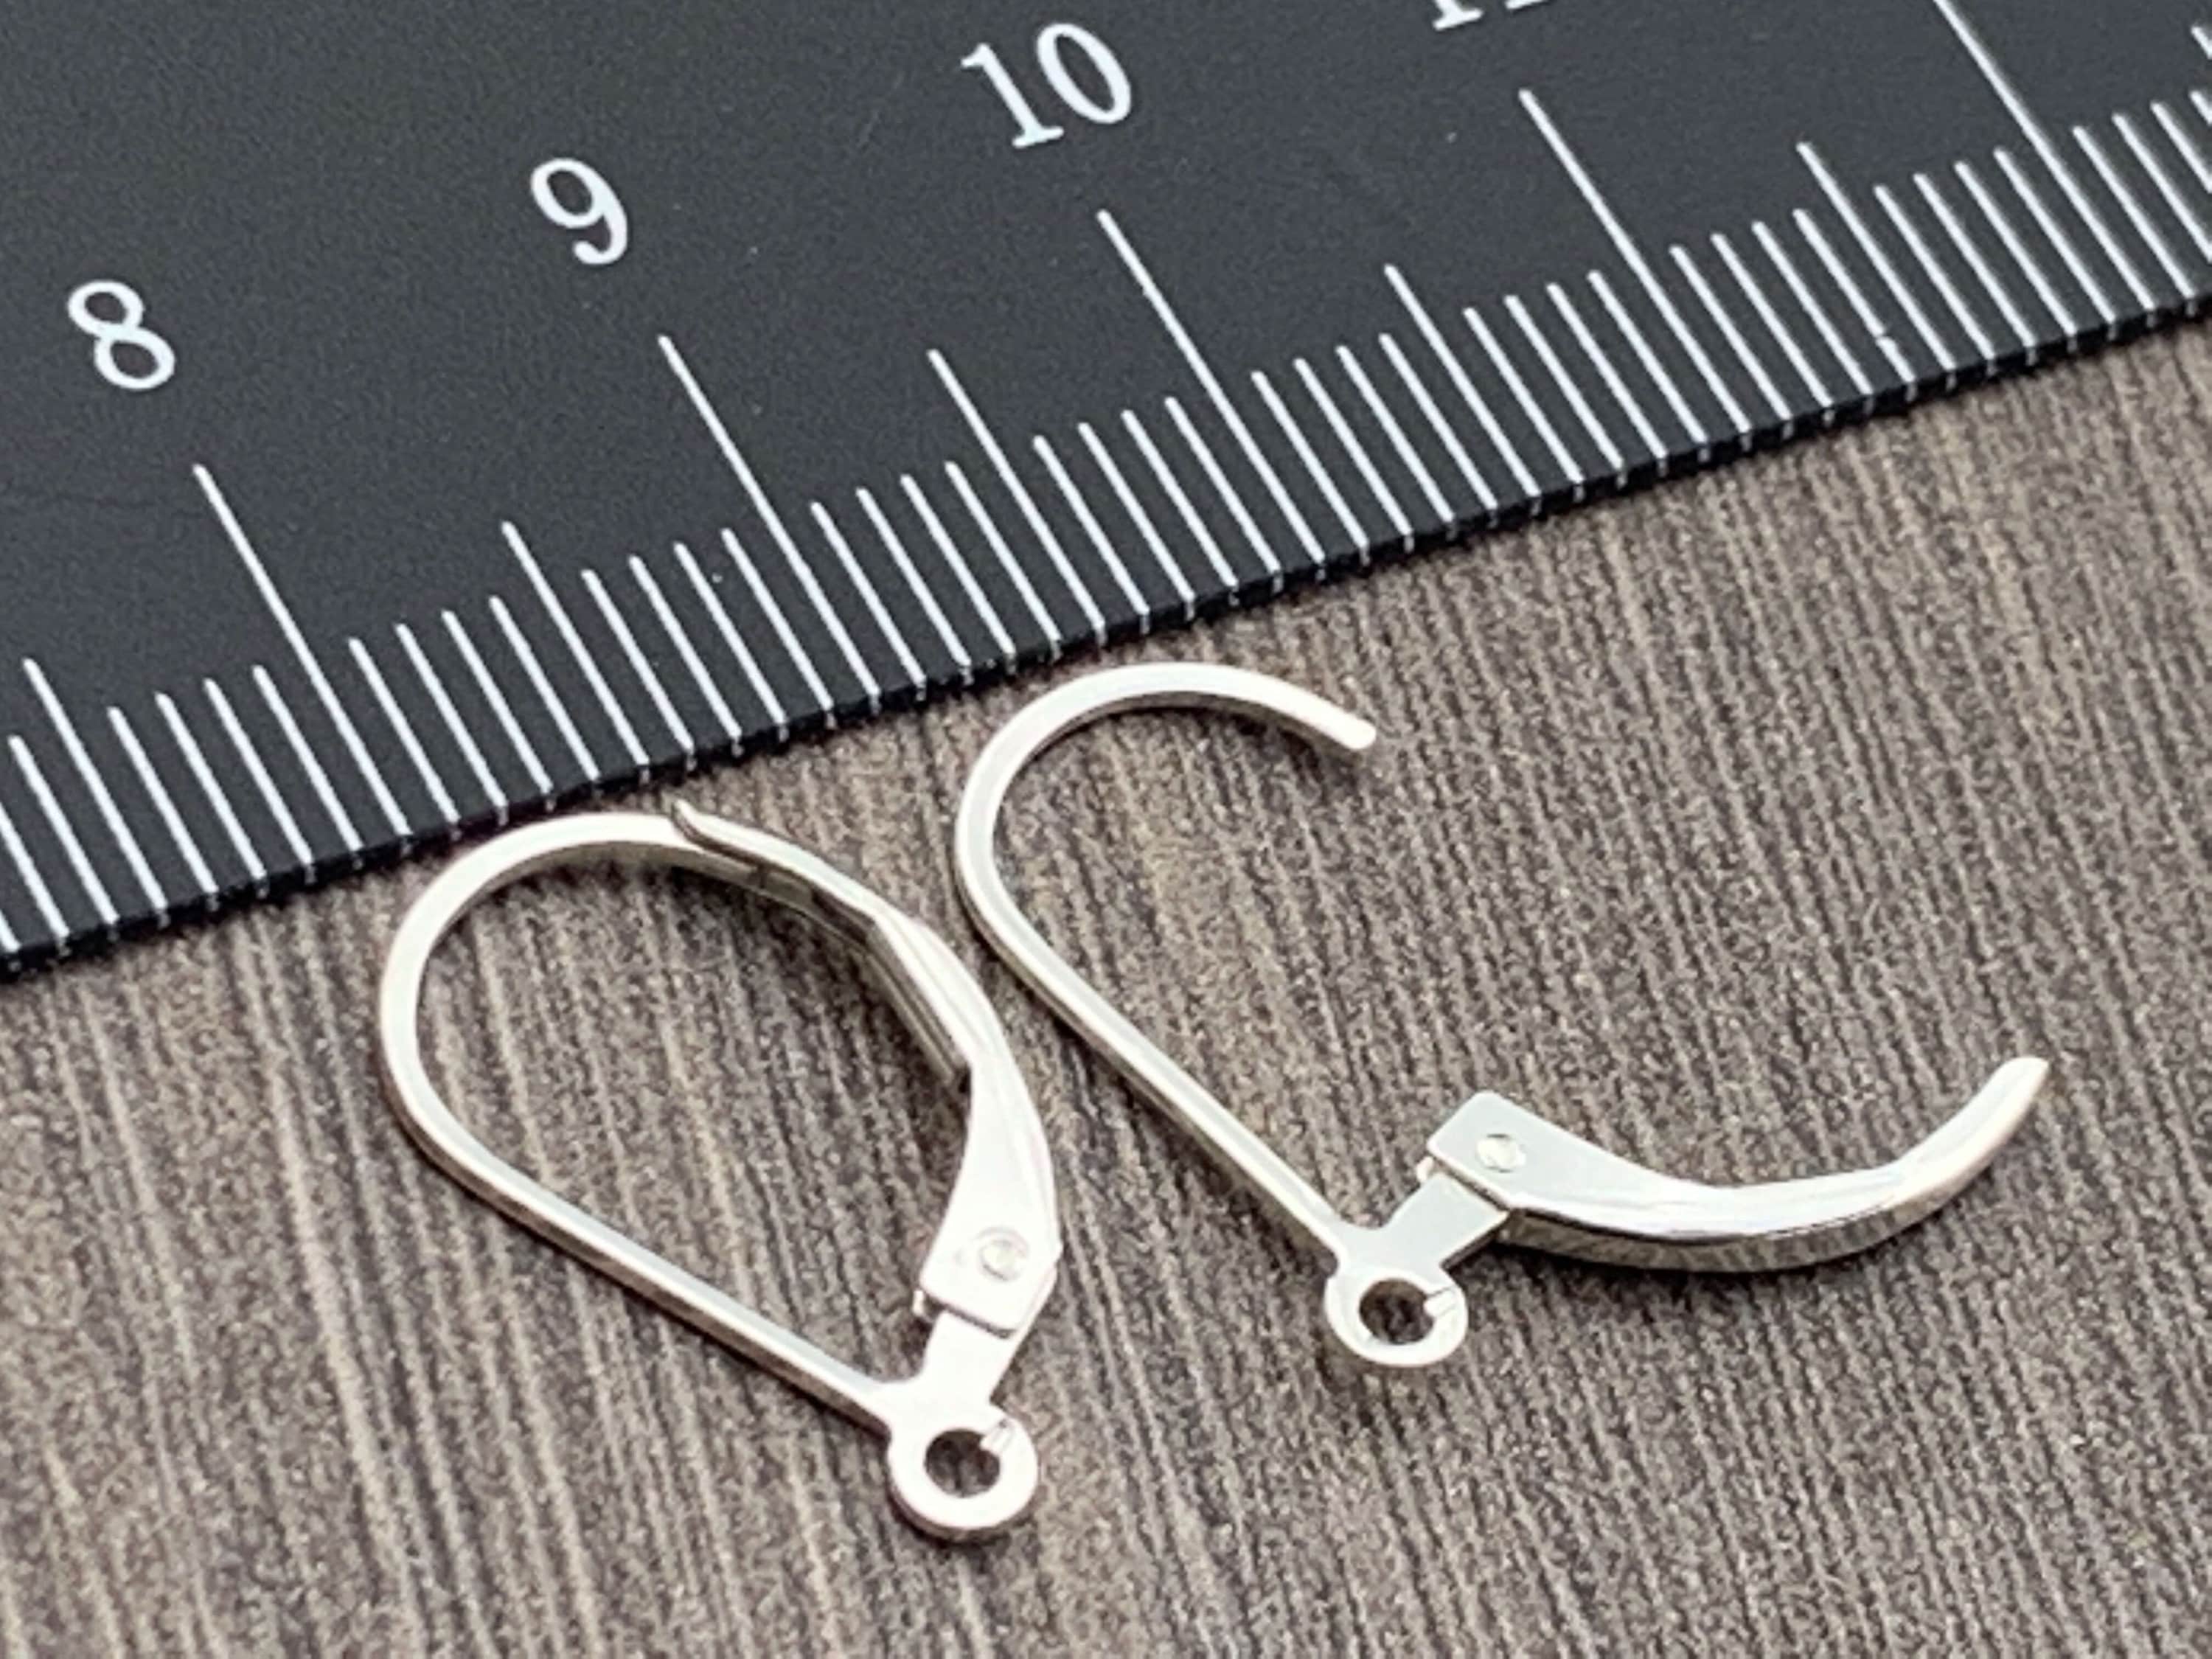 20pcs 5 Styles Leverback Earring Findings 304 Stainless Steel Rose Gold  Leverback French Earring Hooks Open Loop Leverback Earring Hoop for Earring  Making 